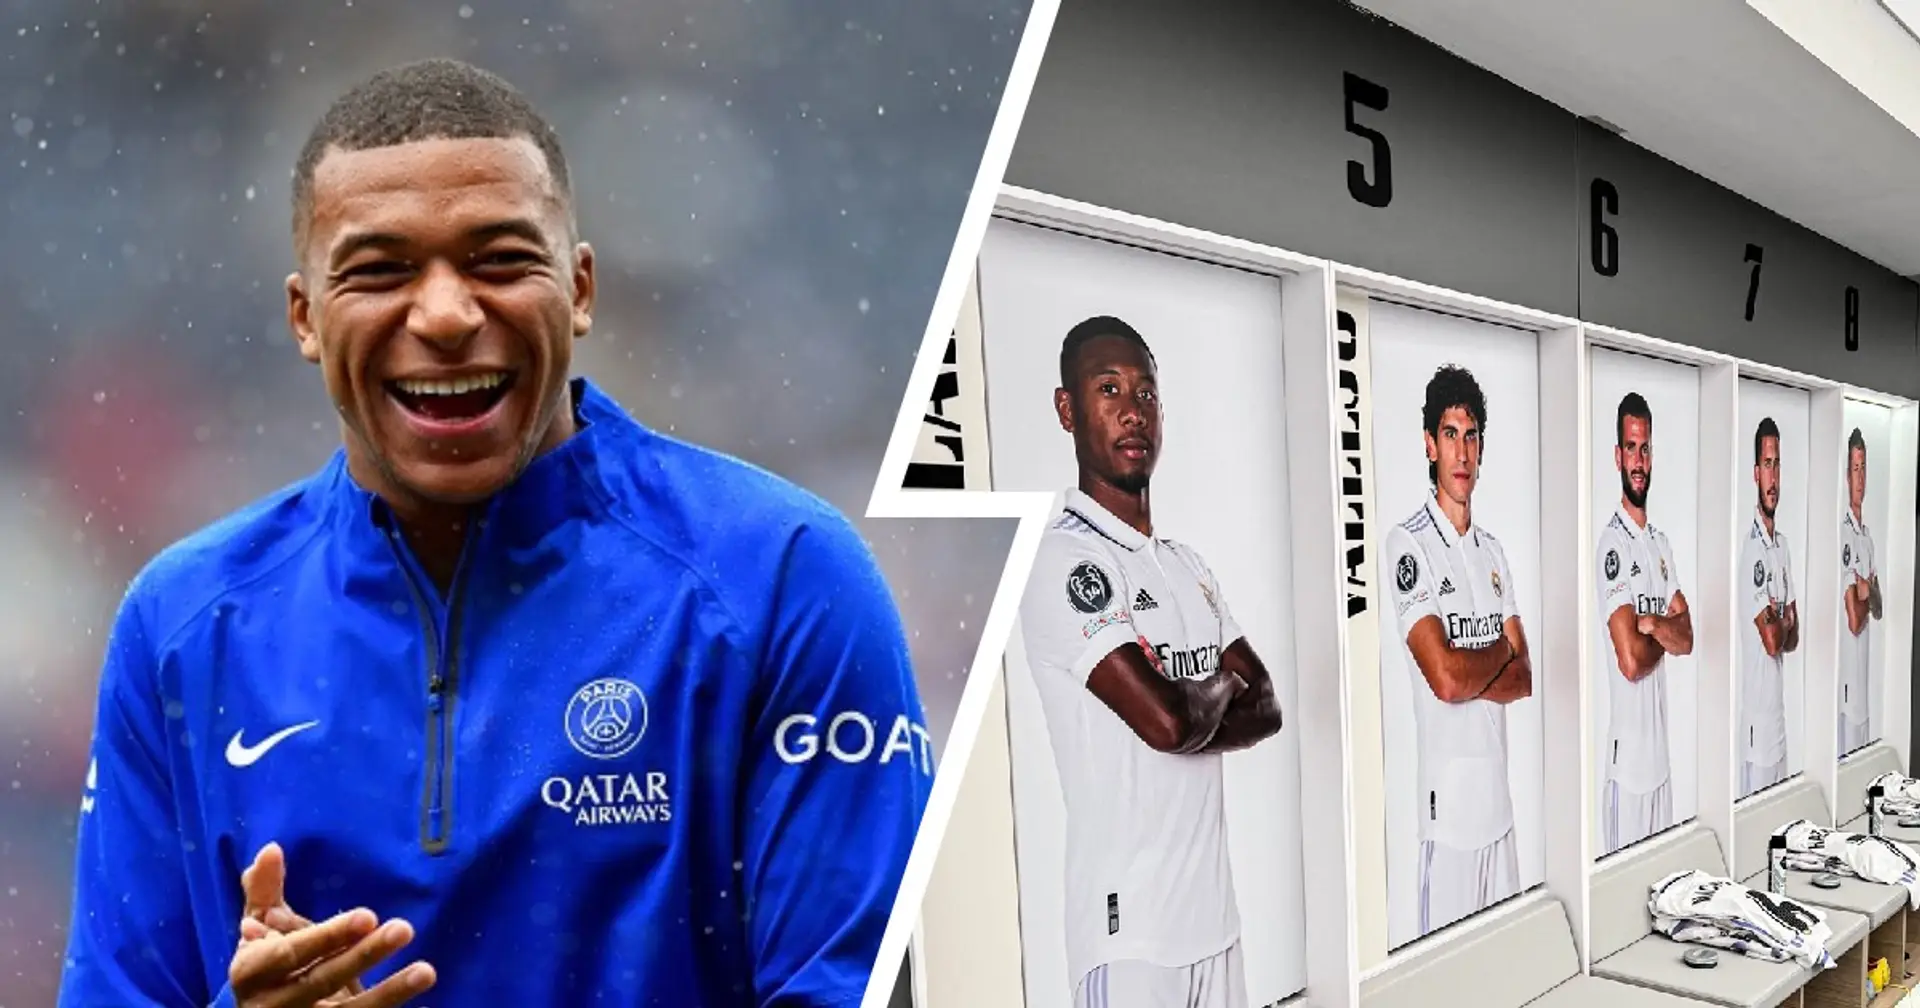 Real Madrid legend could vacate jersey number for Mbappe next season - player named 